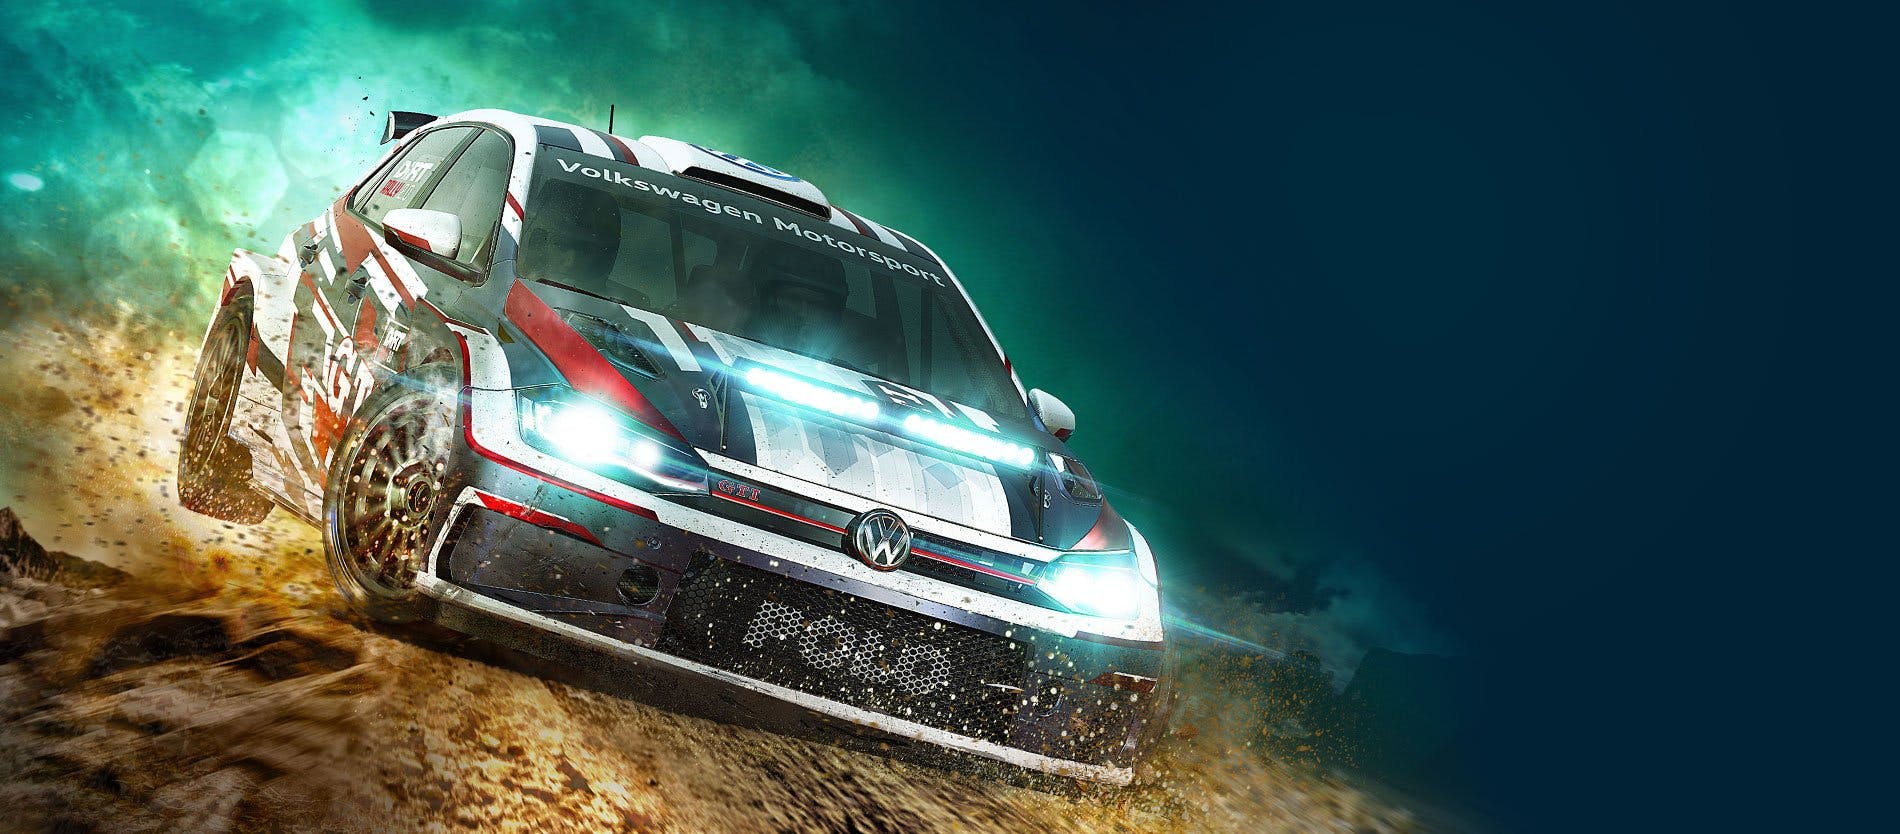 Game - DiRT Rally 2.0